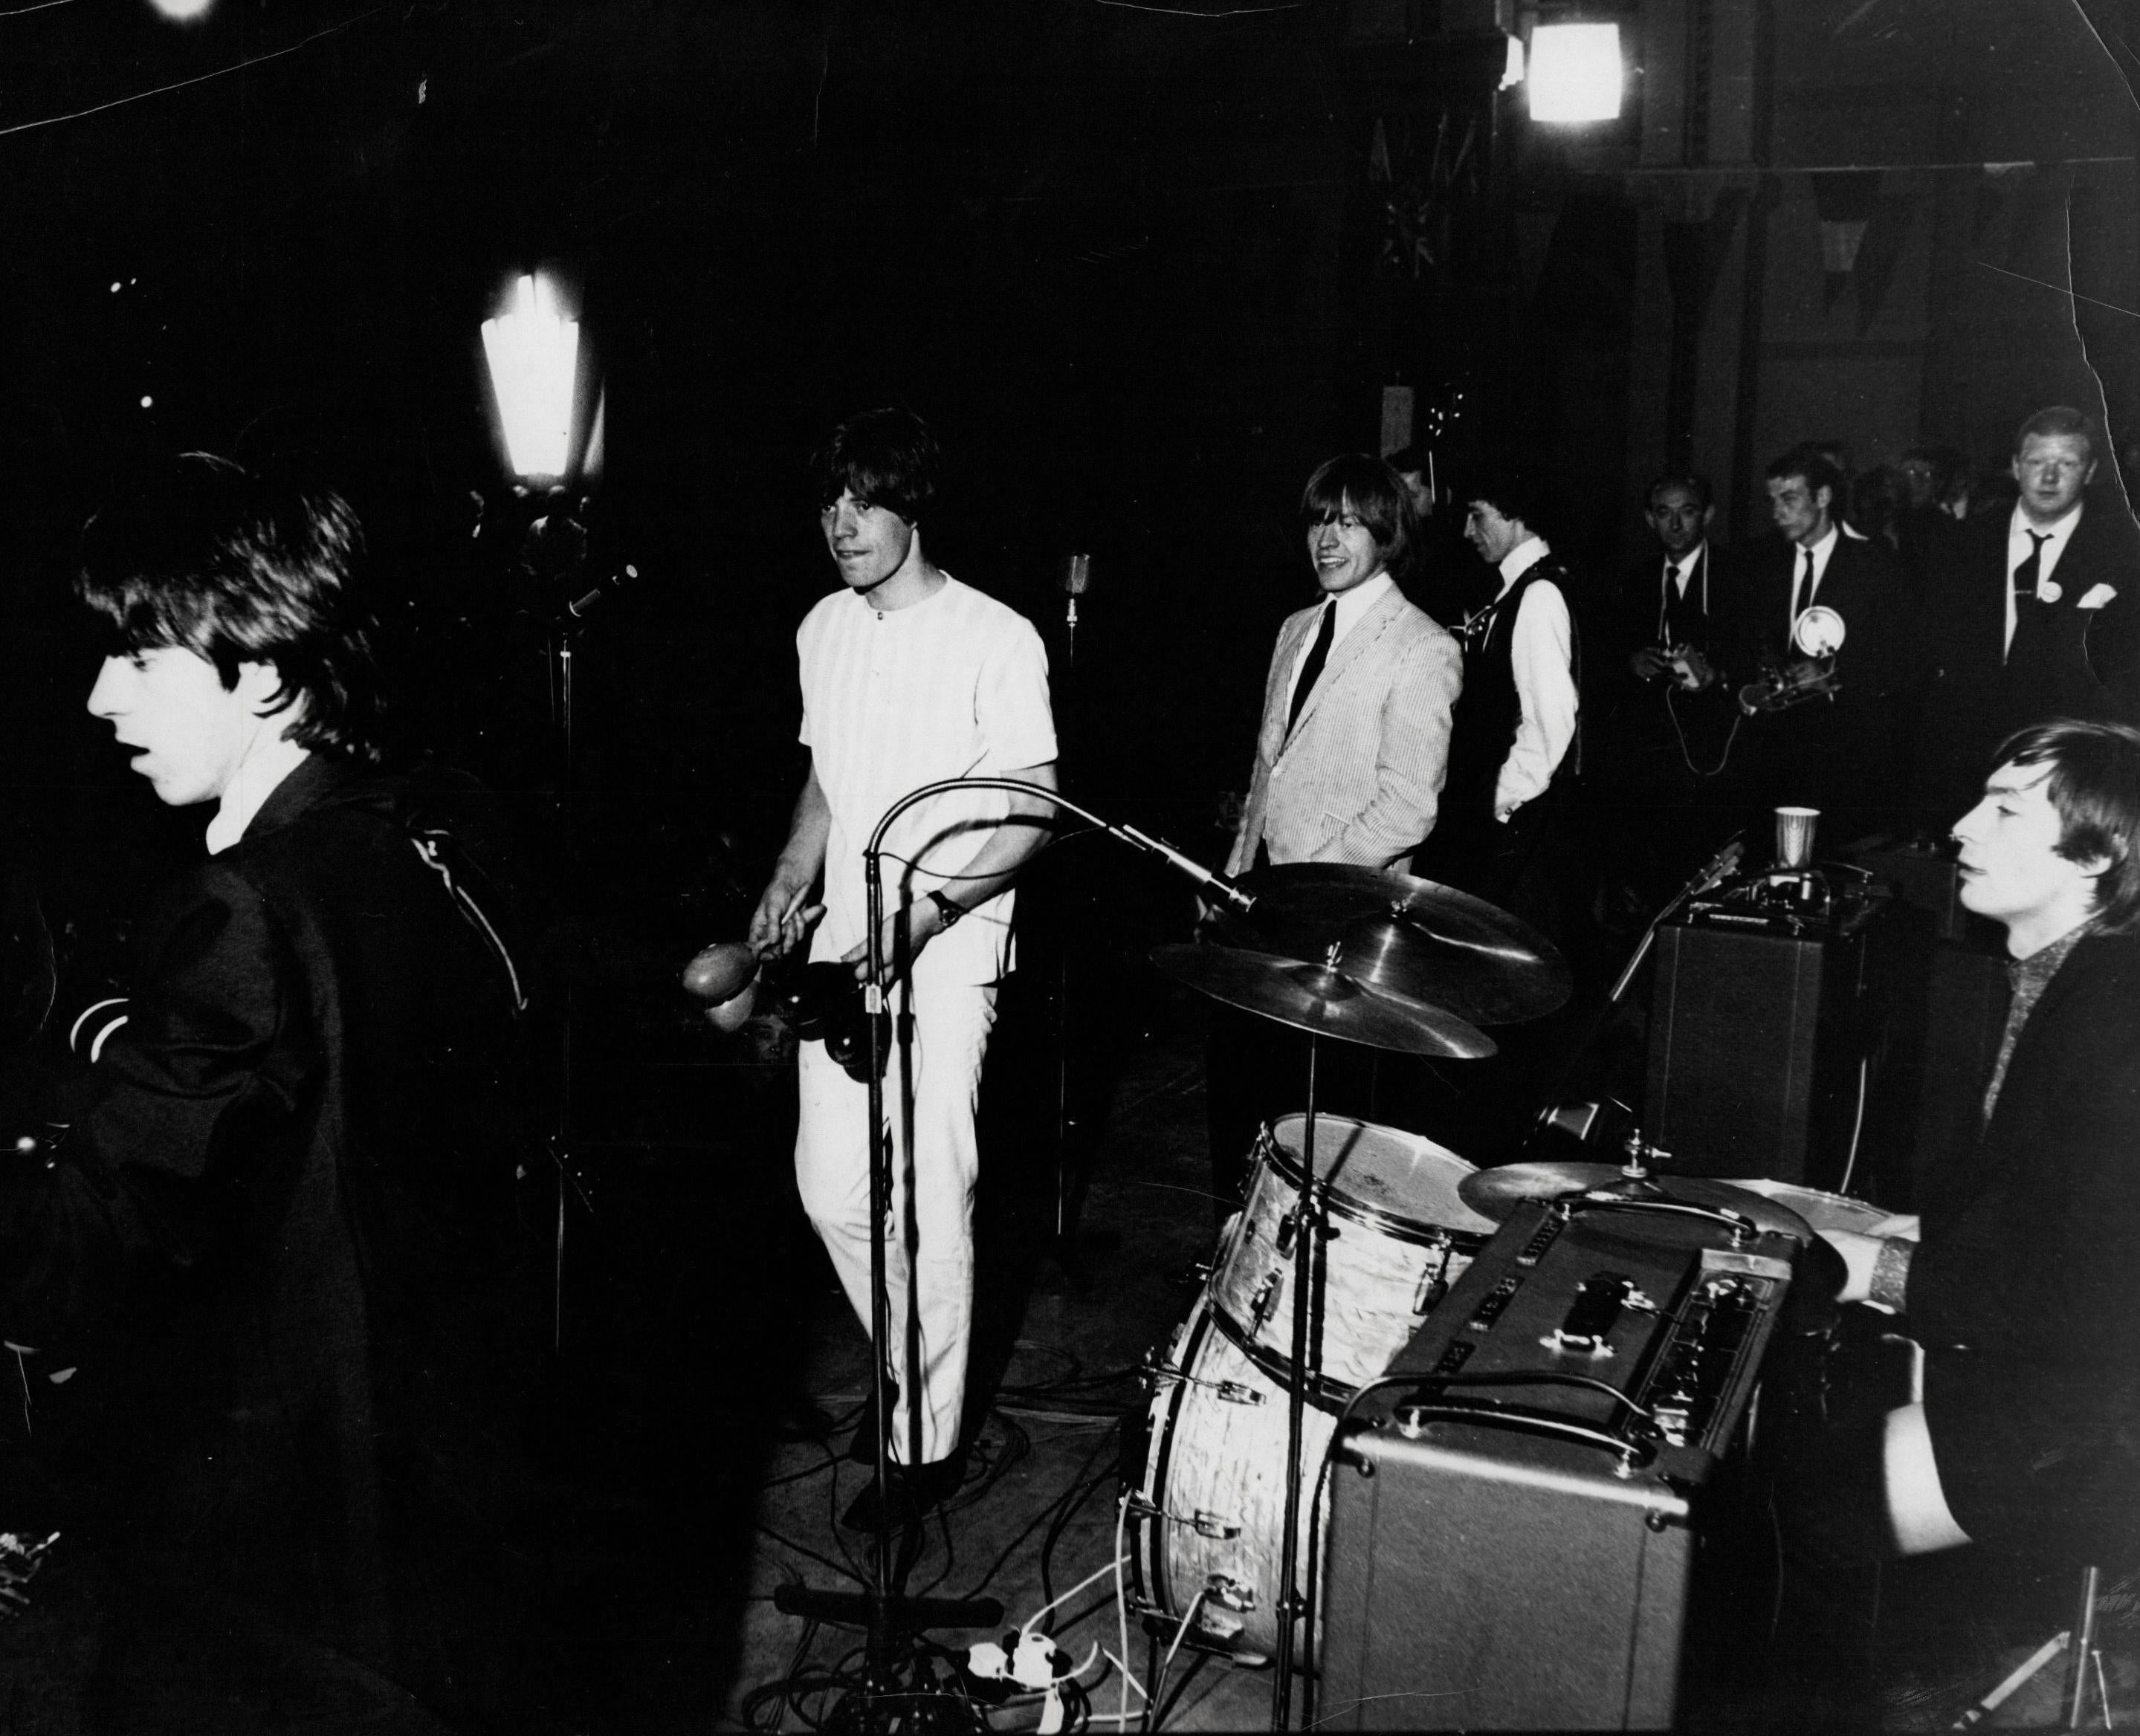 Unknown Black and White Photograph - The Rolling Stones Walking on Stage Vintage Original Photograph